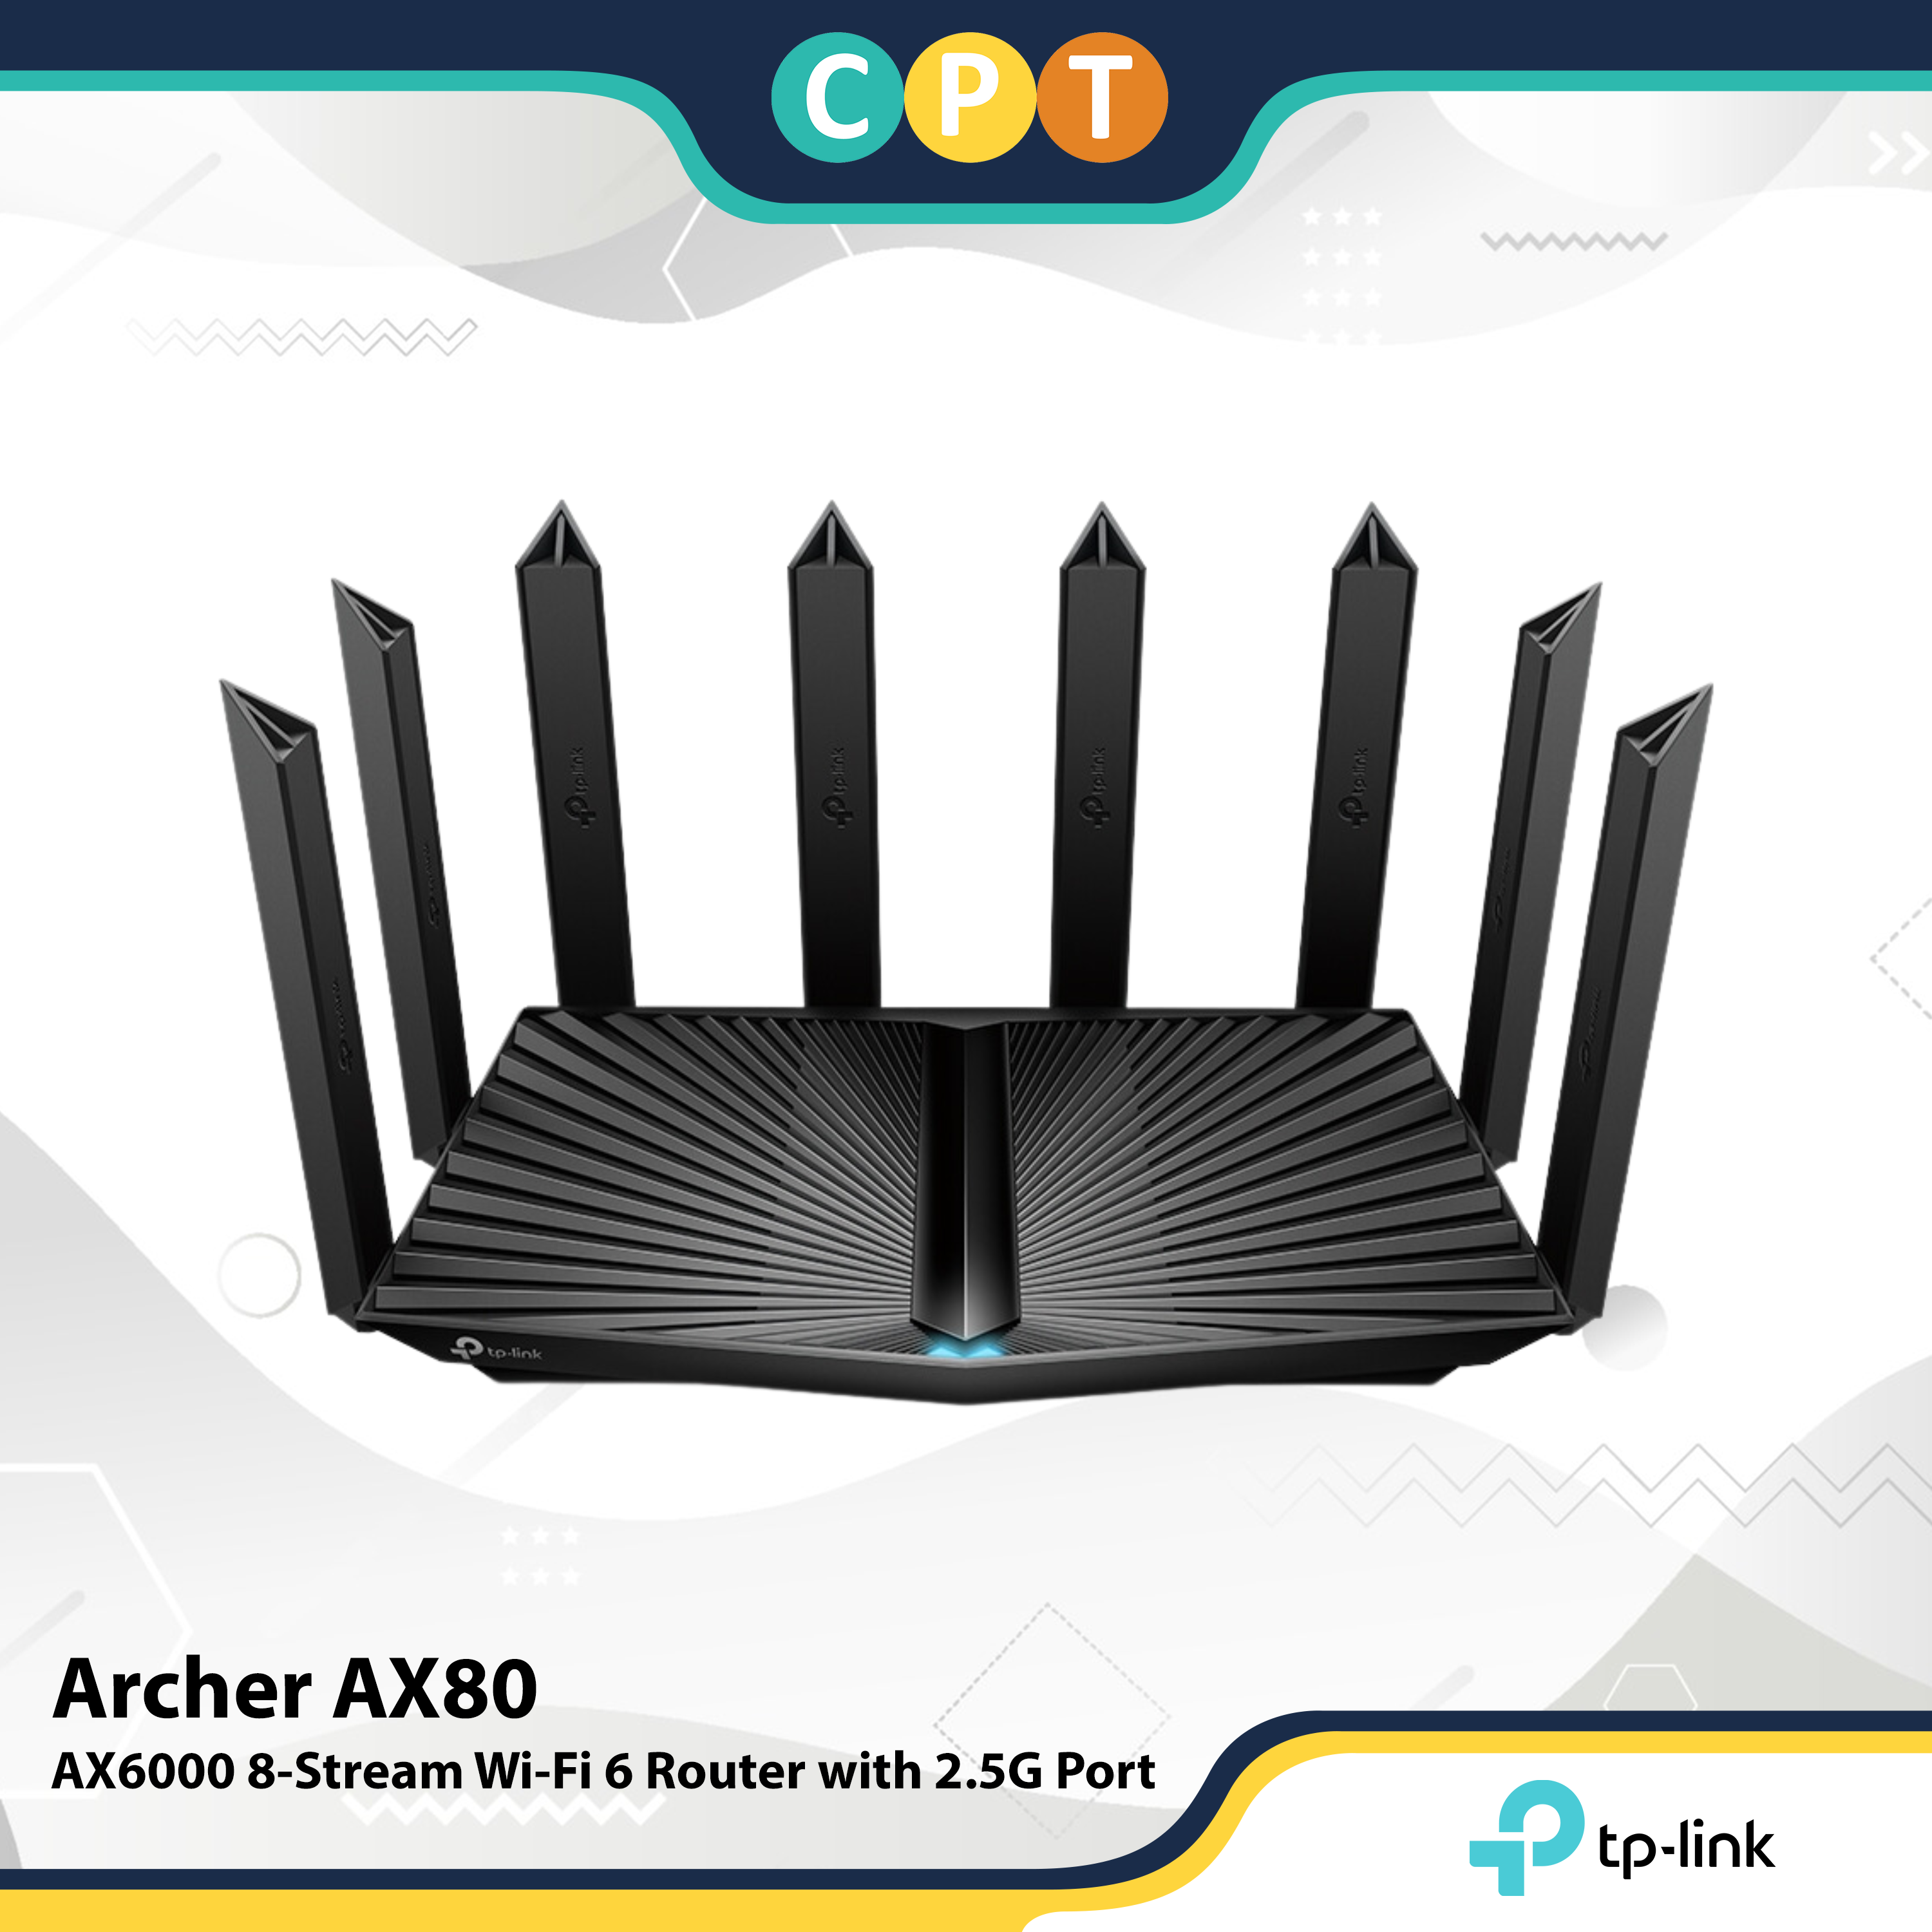 TP-Link Archer AX80 AX6000 8-Stream Wi-Fi 6 Router with 2.5G Port